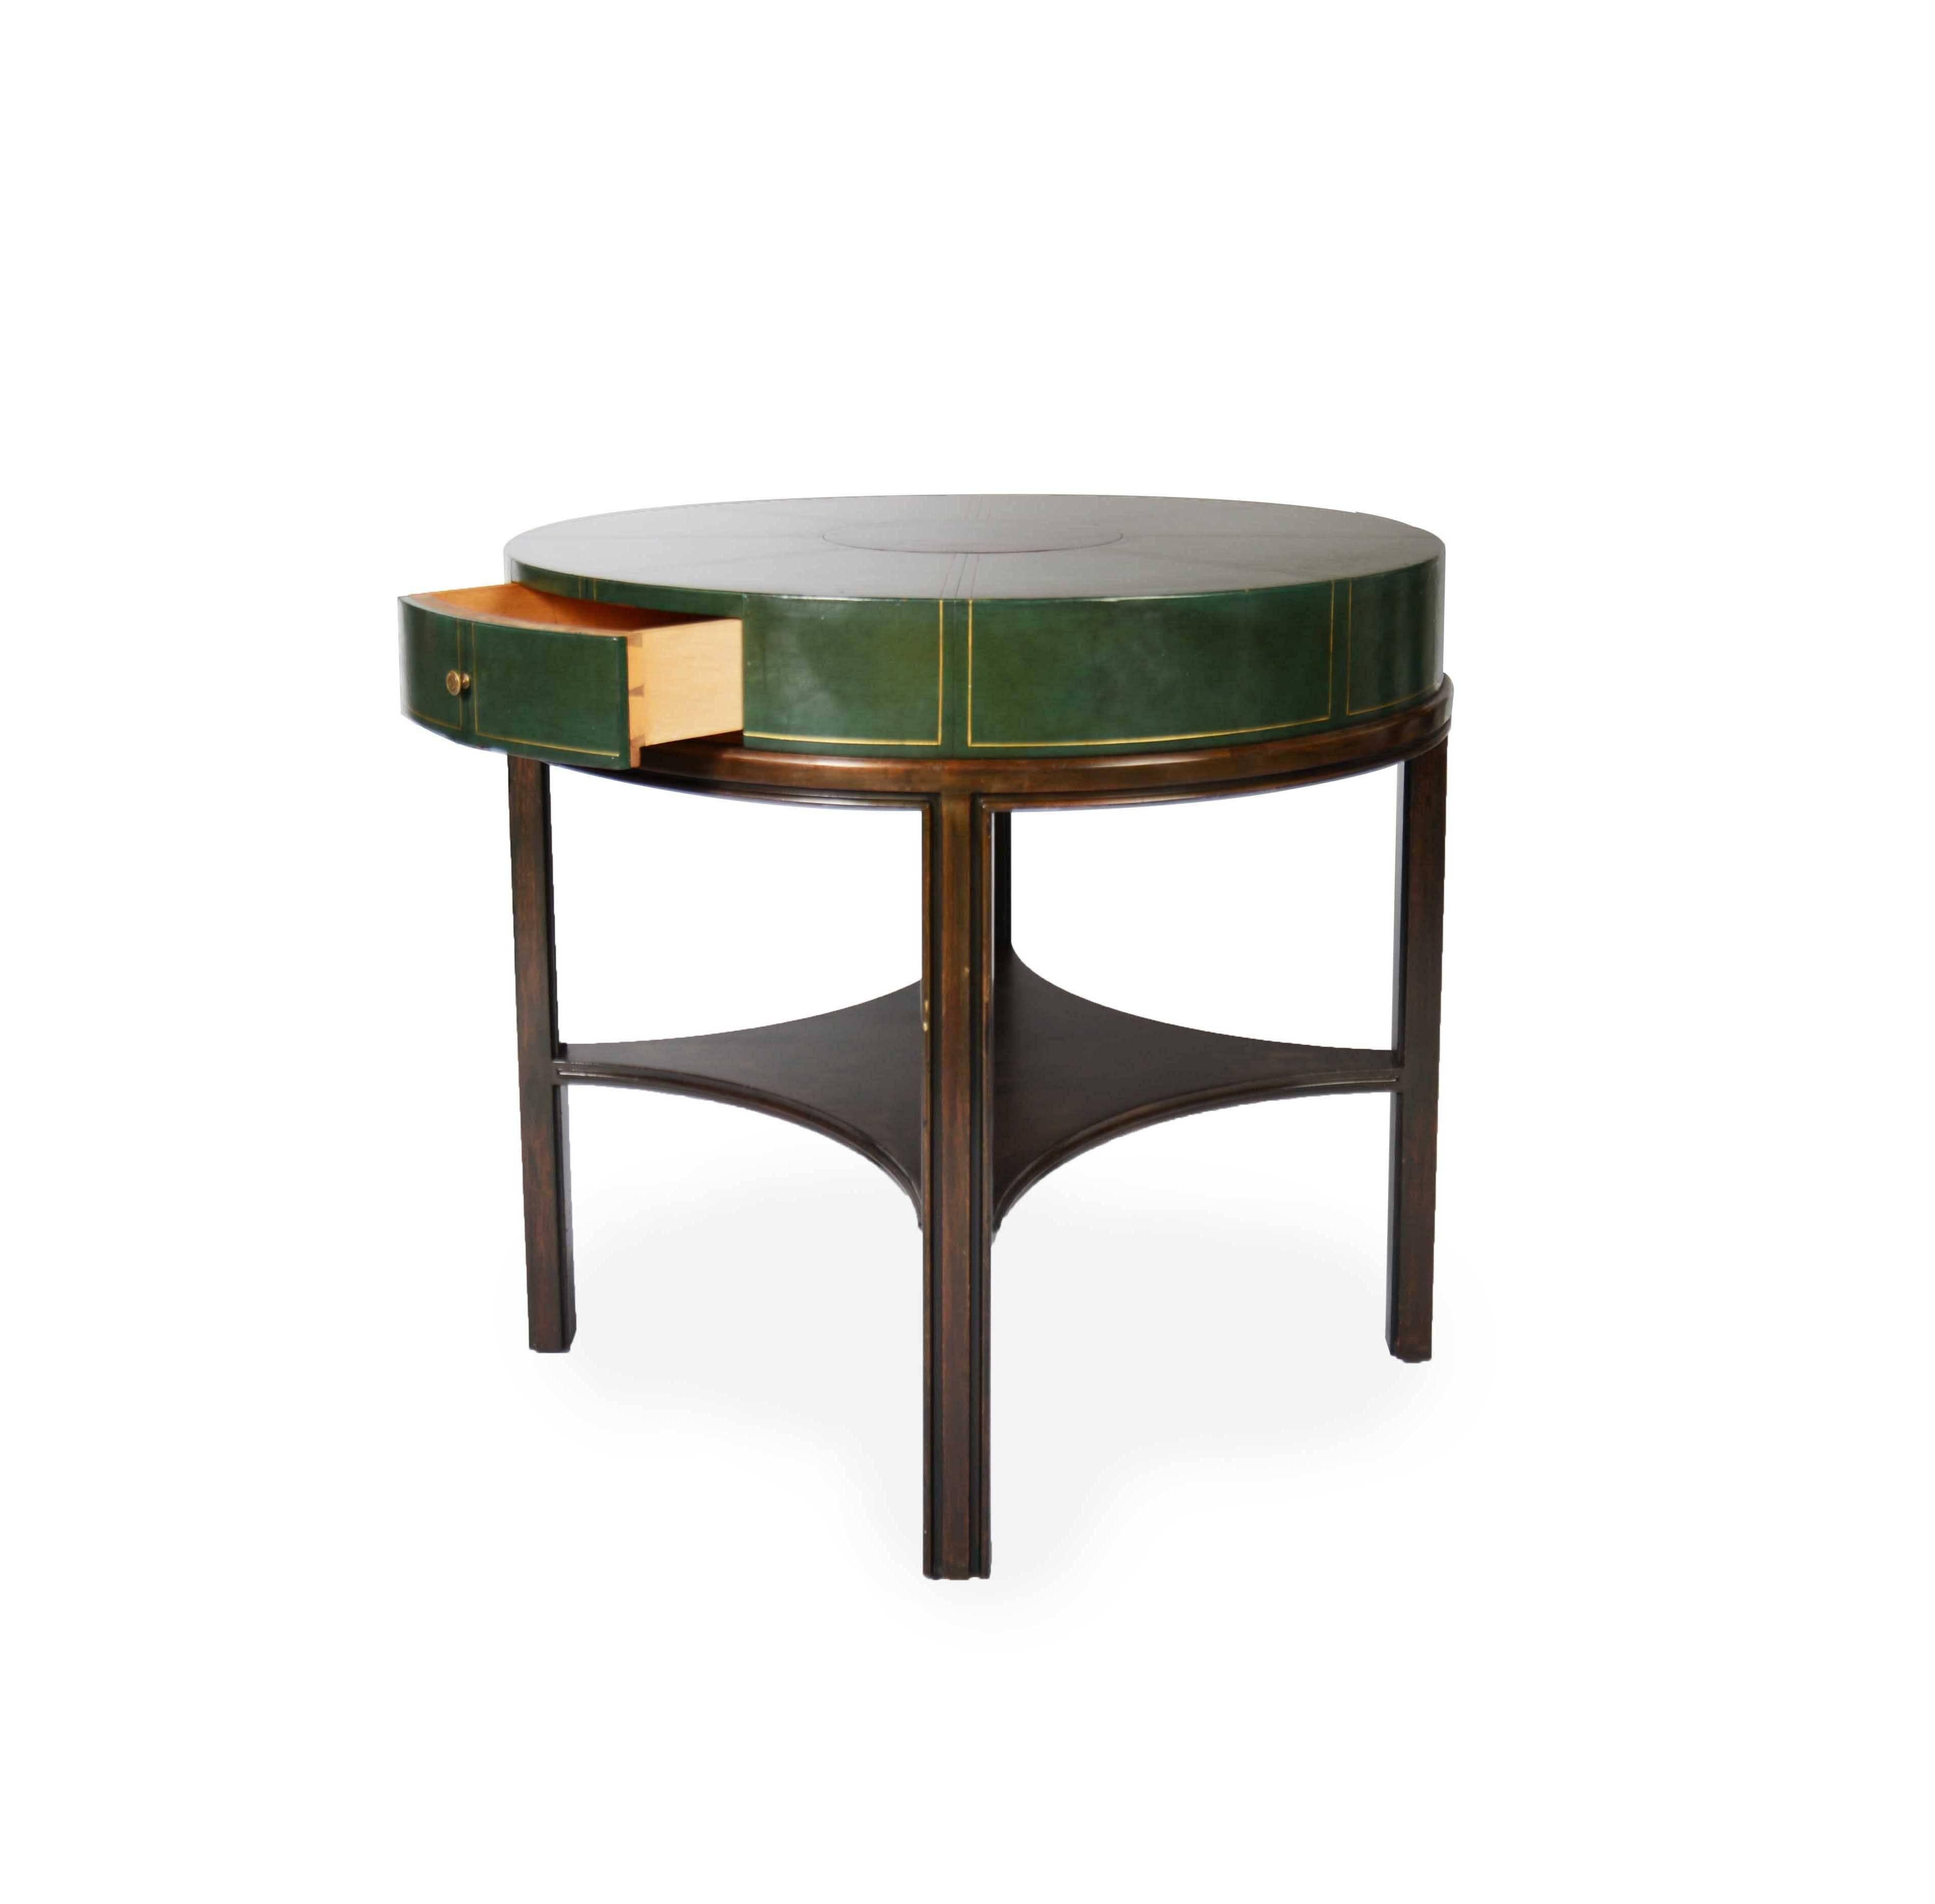 Gold embossed green leather top with small dovetail drawer on a channeled mahogany base produced by Charak.